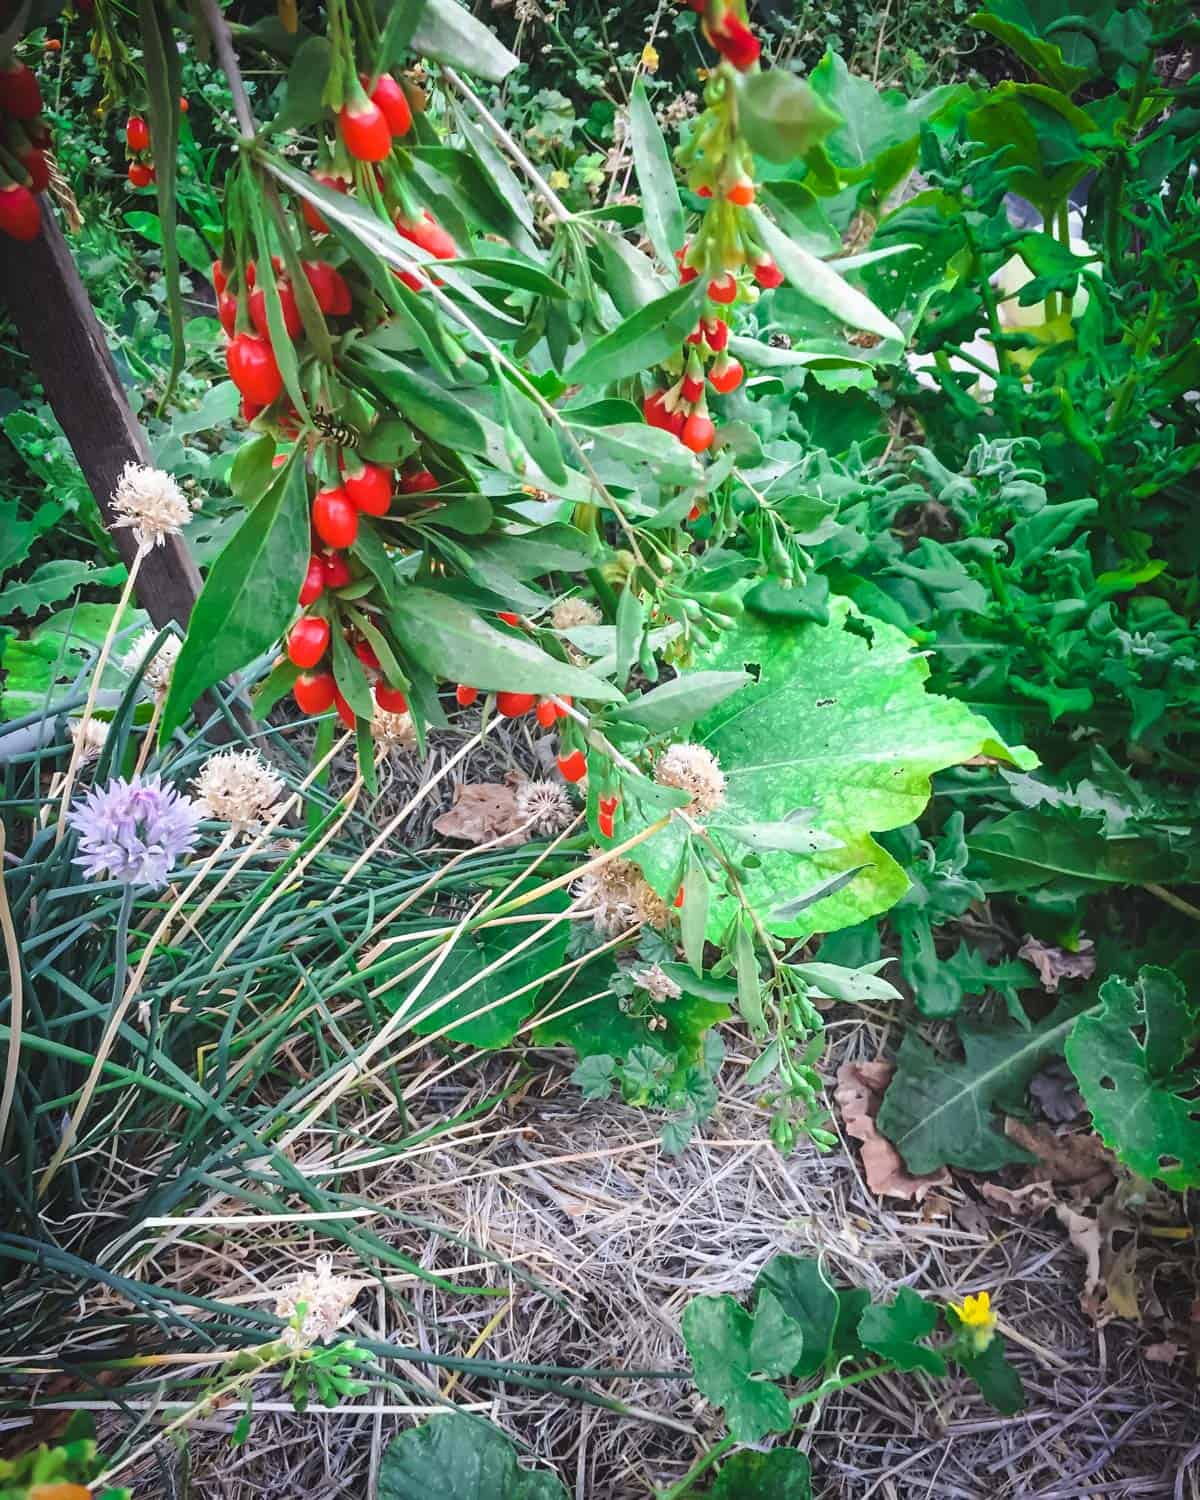 a close up of red goji berries growing next to chives that are flowering